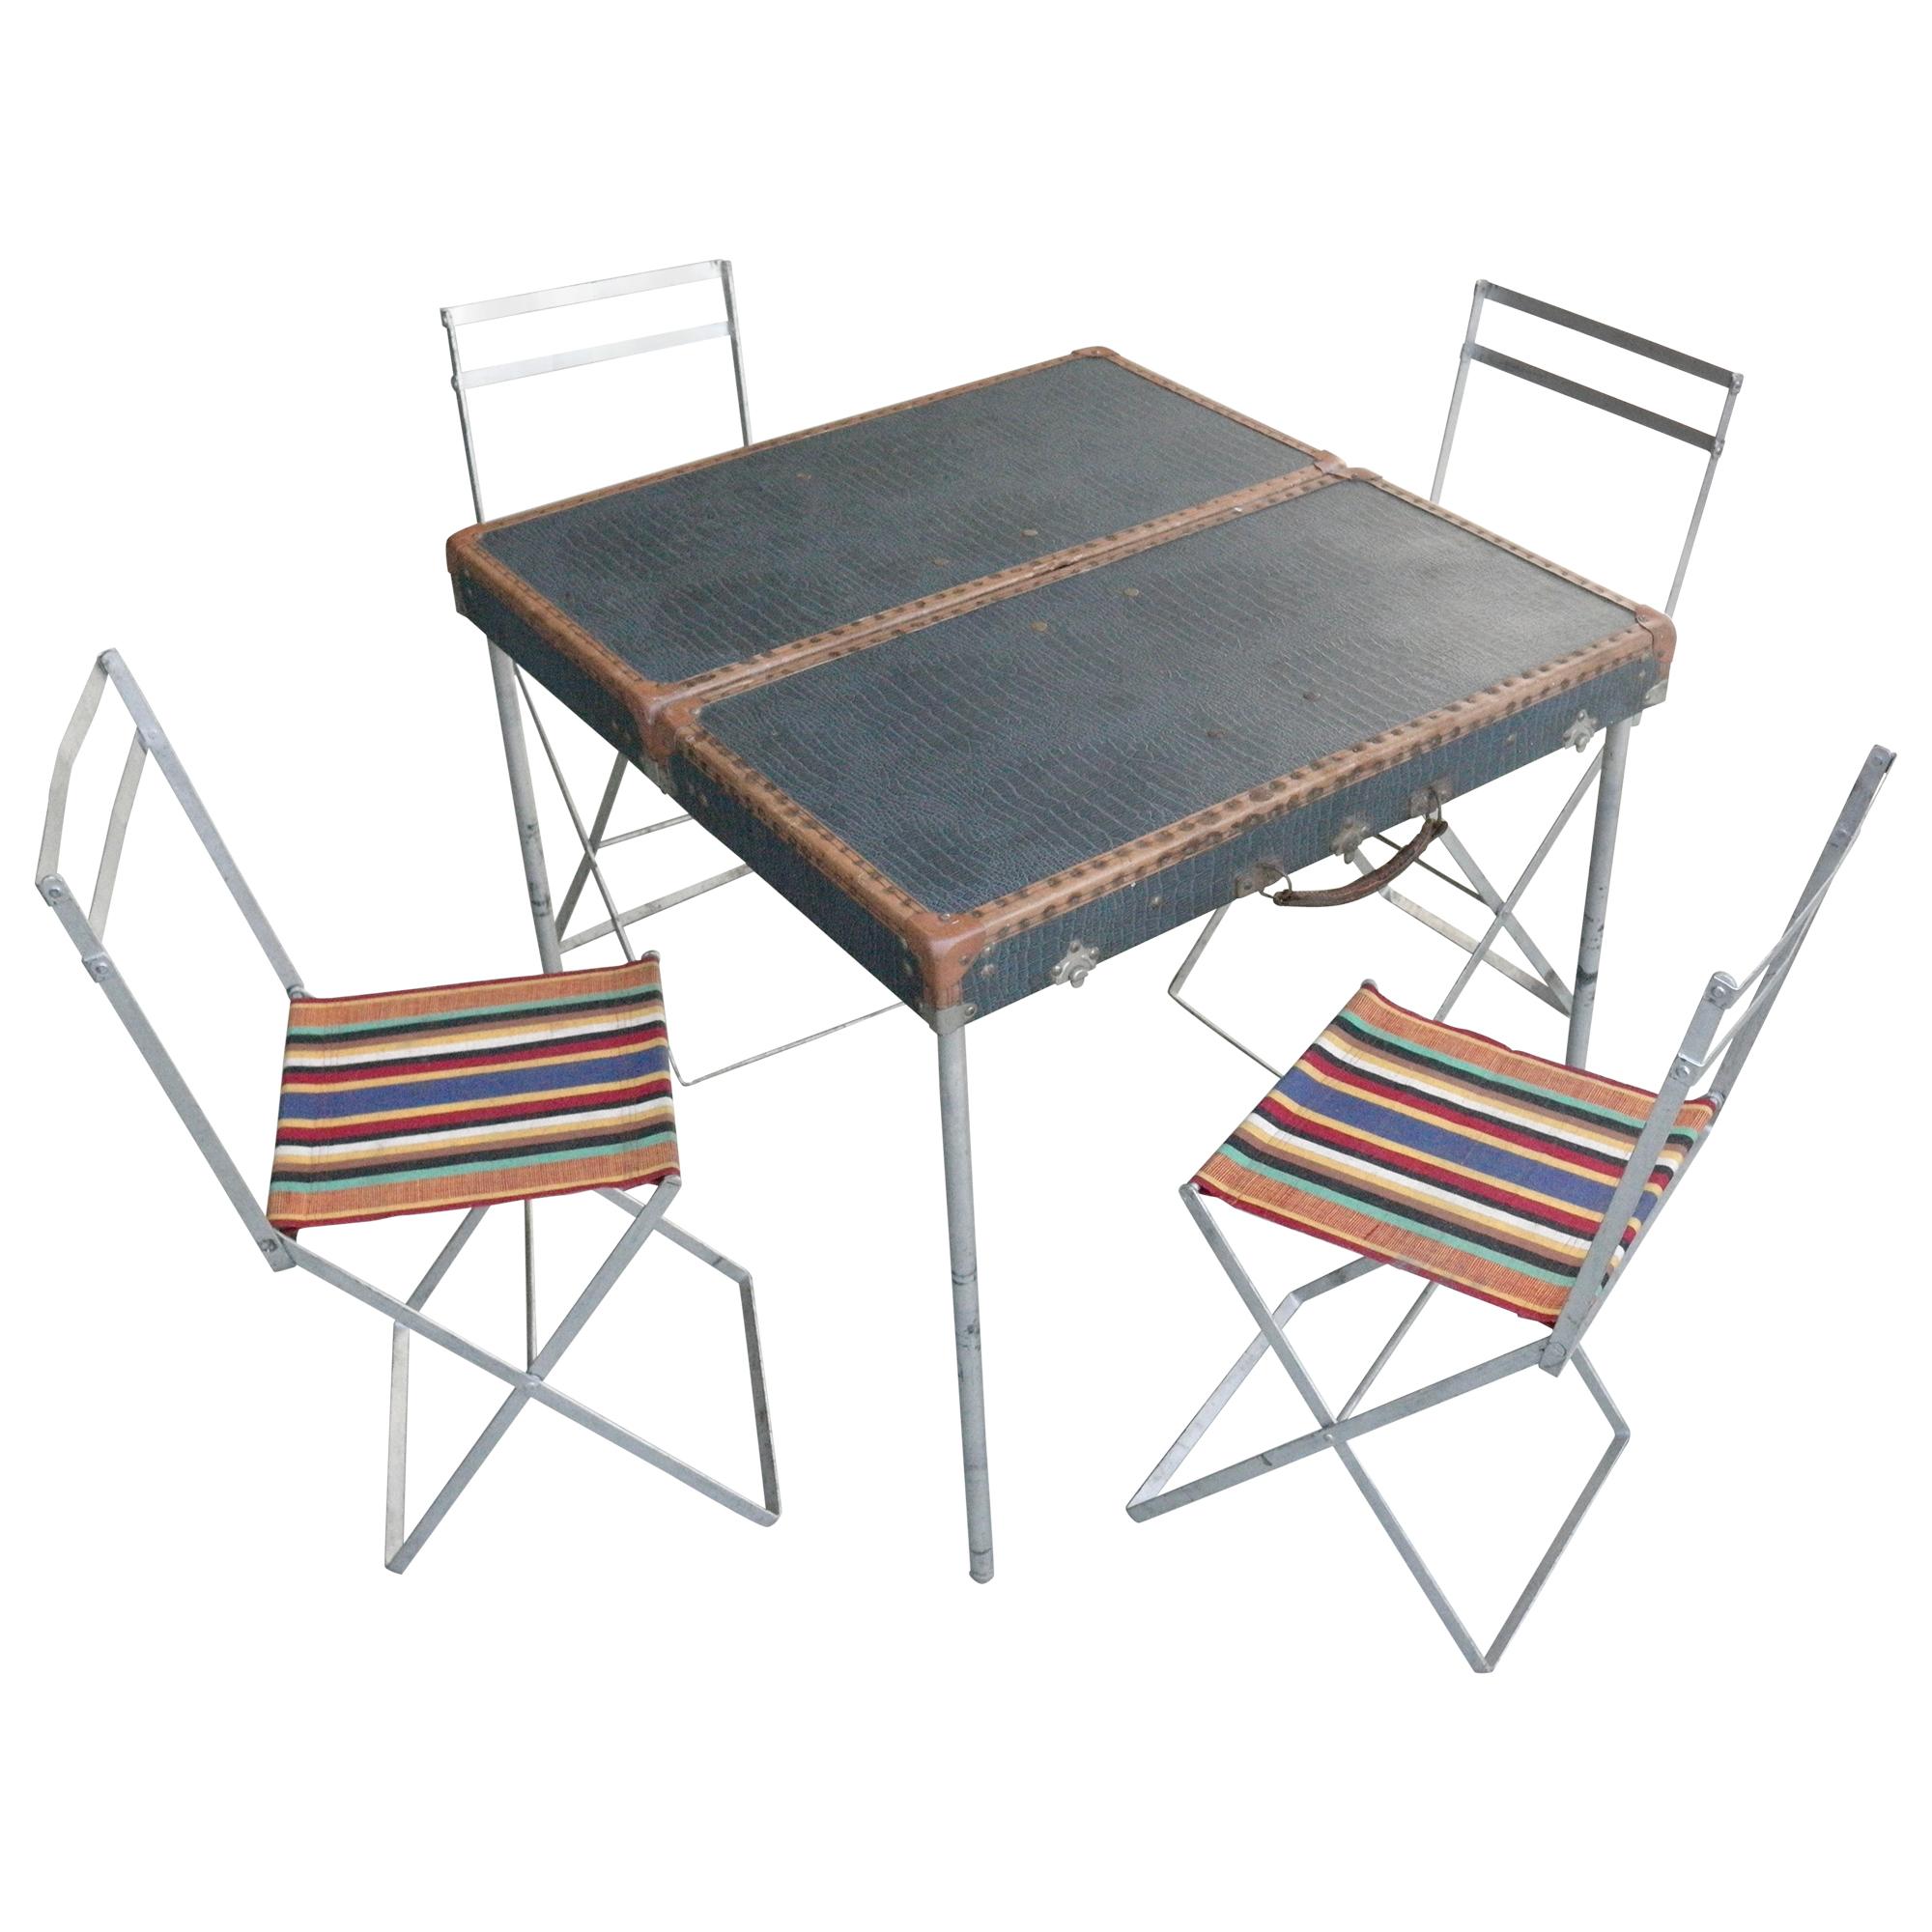 Jacques Biny Picnic Table And Chairs In Suitcase France 1950s By